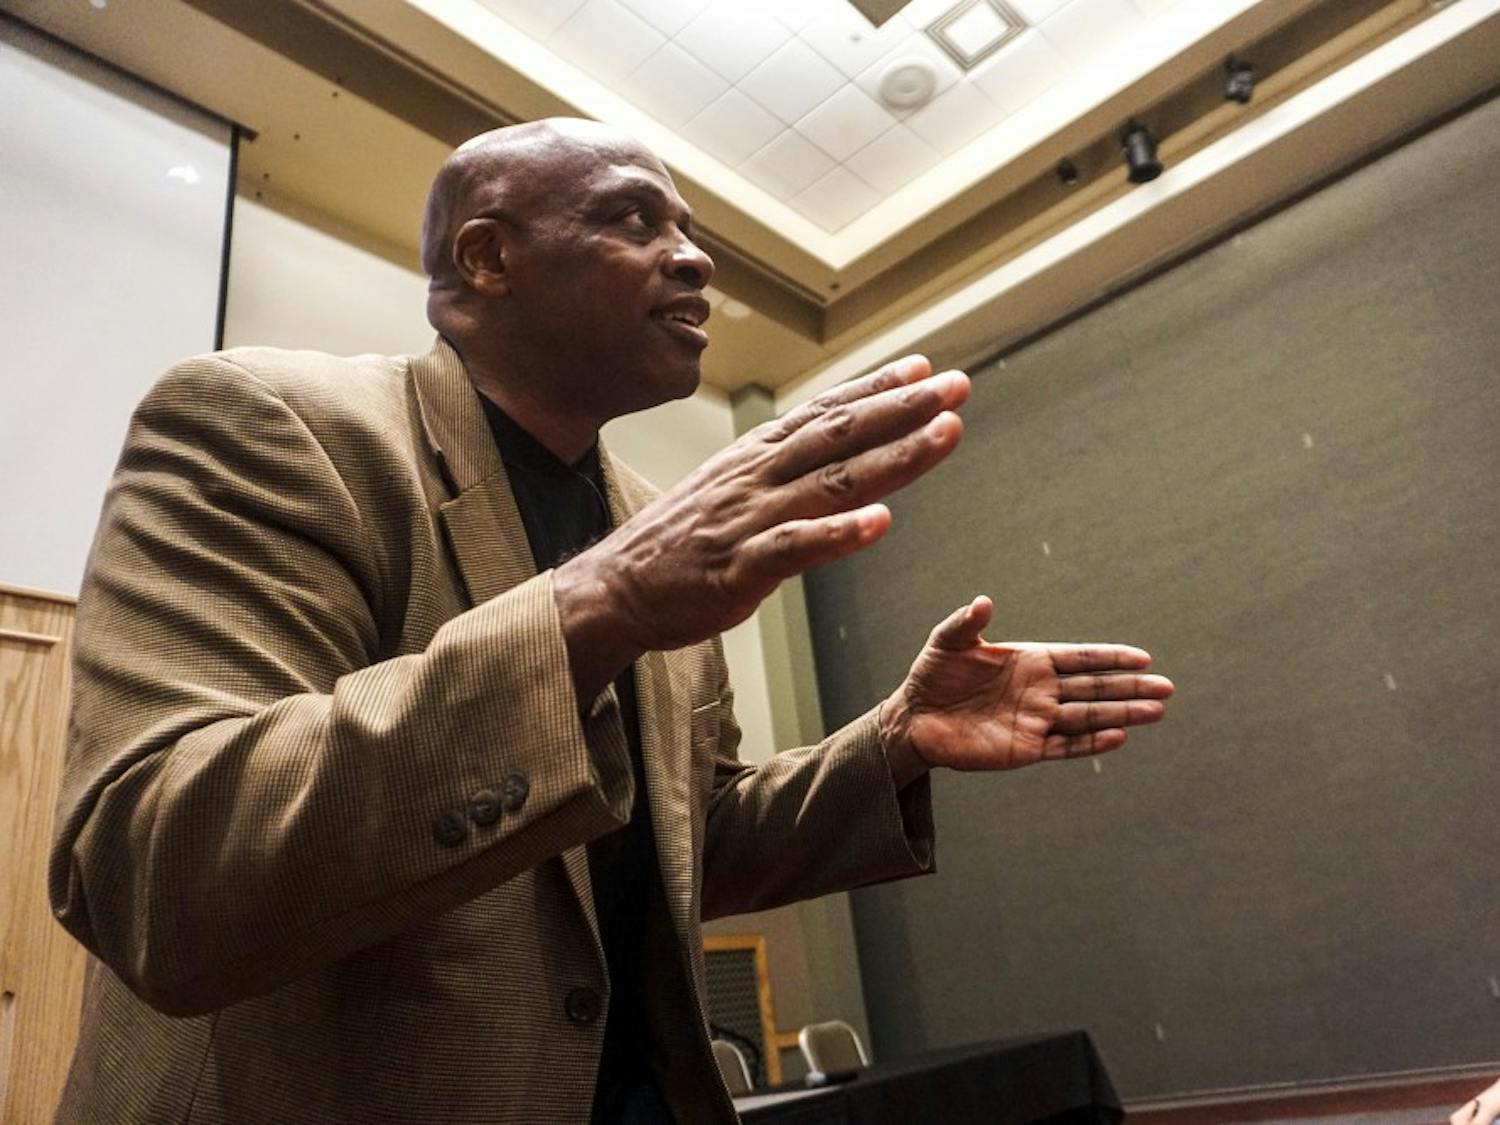 Coach Ken Carter speaks to students at the UNM SUB ballrooms on Tuesday, Oct. 10, 2017, giving advice on achieving life goals.

